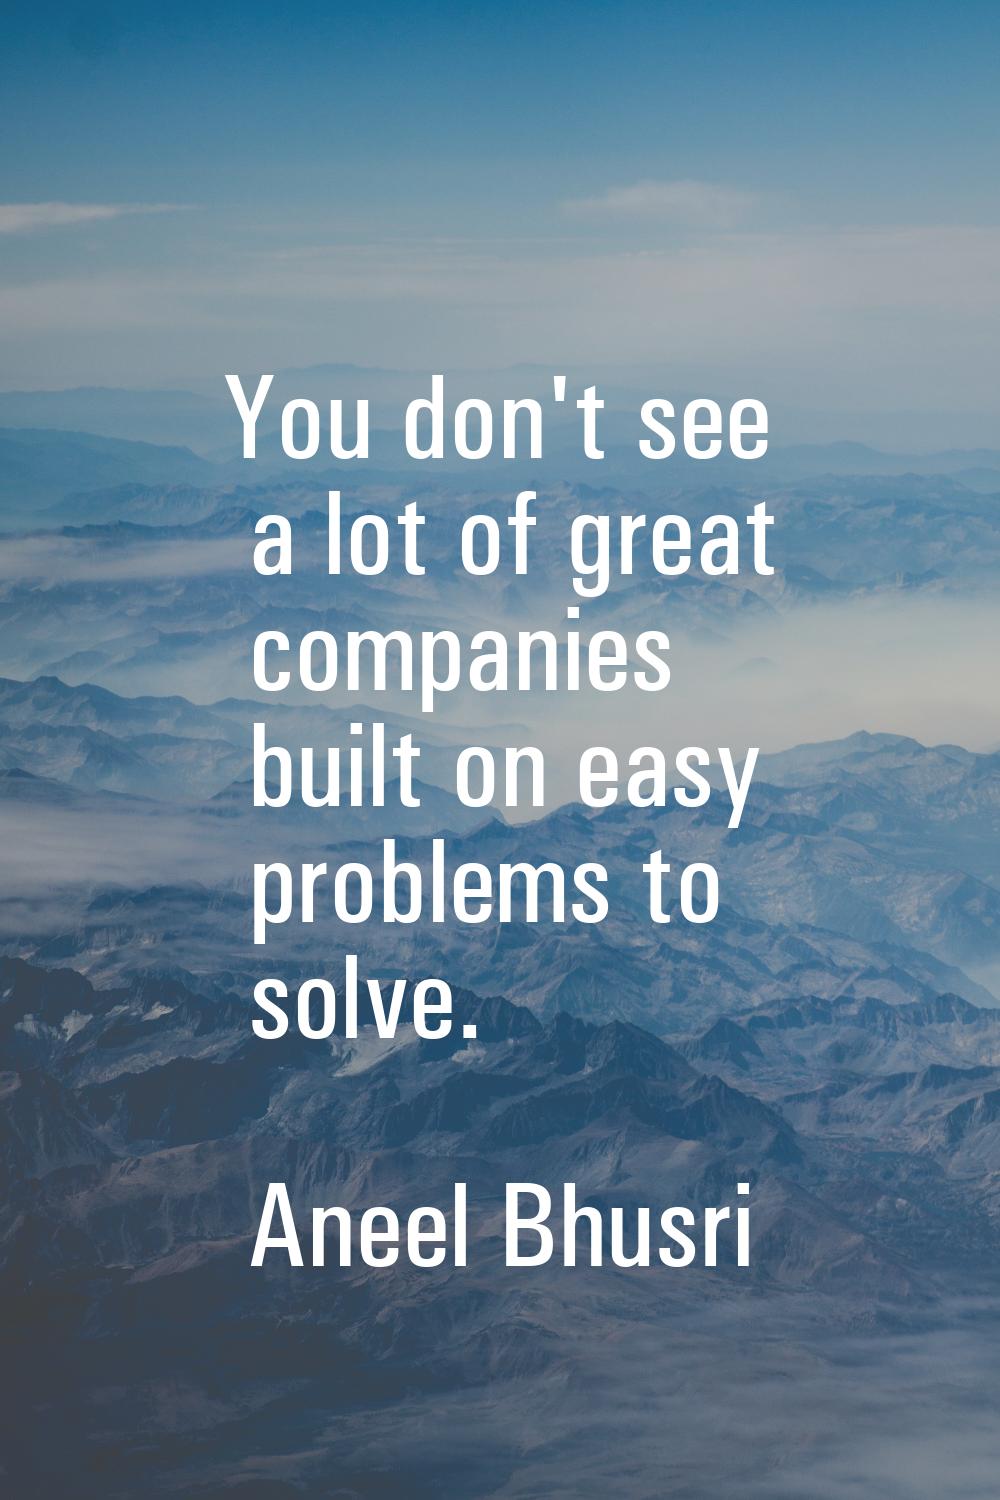 You don't see a lot of great companies built on easy problems to solve.